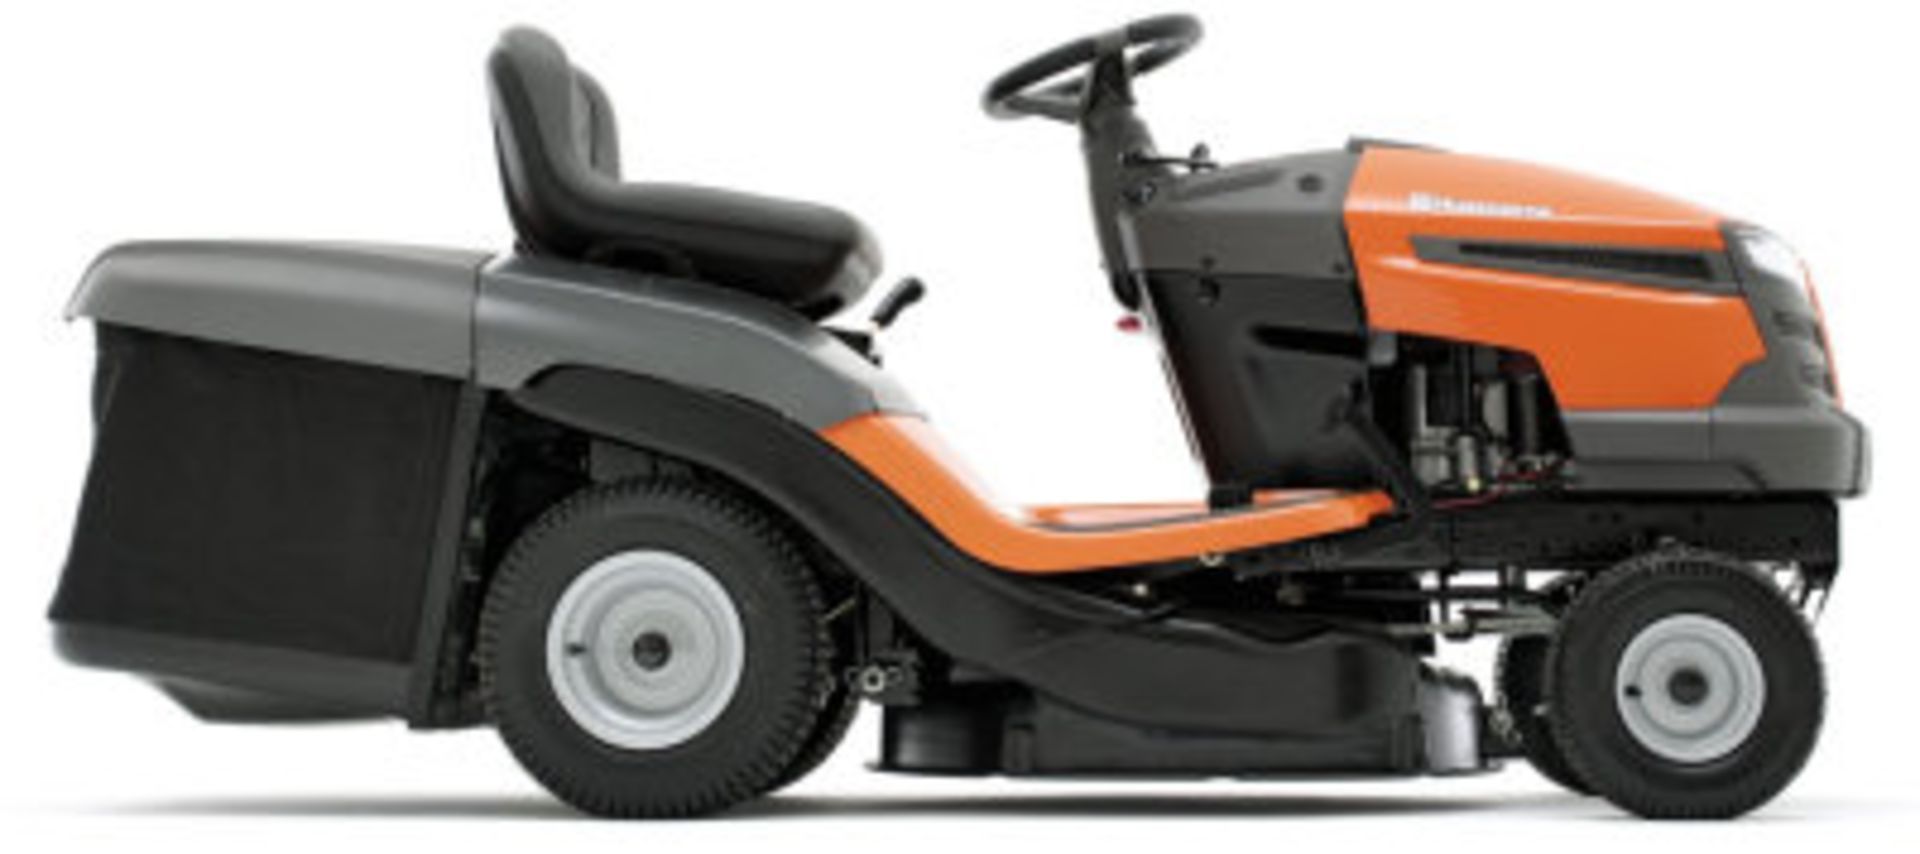 2020 BRAND NEW HUSQVARNA TC130 ROTARY RIDE ON LAWN MOWER (REAR DISCHARGE) C/W COLLECTOR *PLUS VAT* - Image 3 of 3